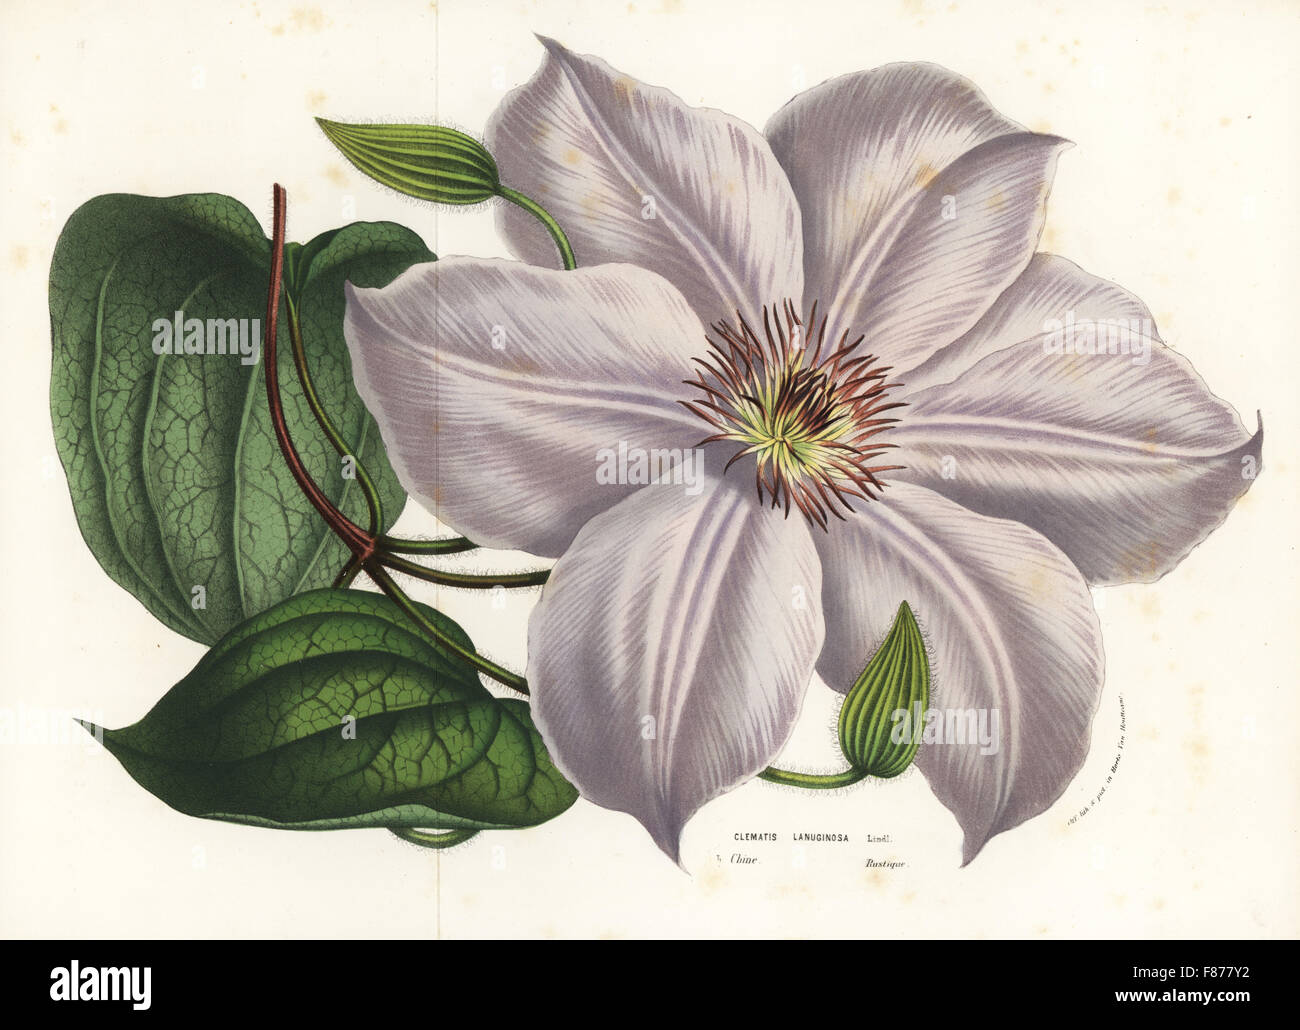 Clematis lanuginosa (China). Handcoloured lithograph from Louis van Houtte and Charles Lemaire's Flowers of the Gardens and Hothouses of Europe, Flore des Serres et des Jardins de l'Europe, Ghent, Belgium, 1856. Stock Photo